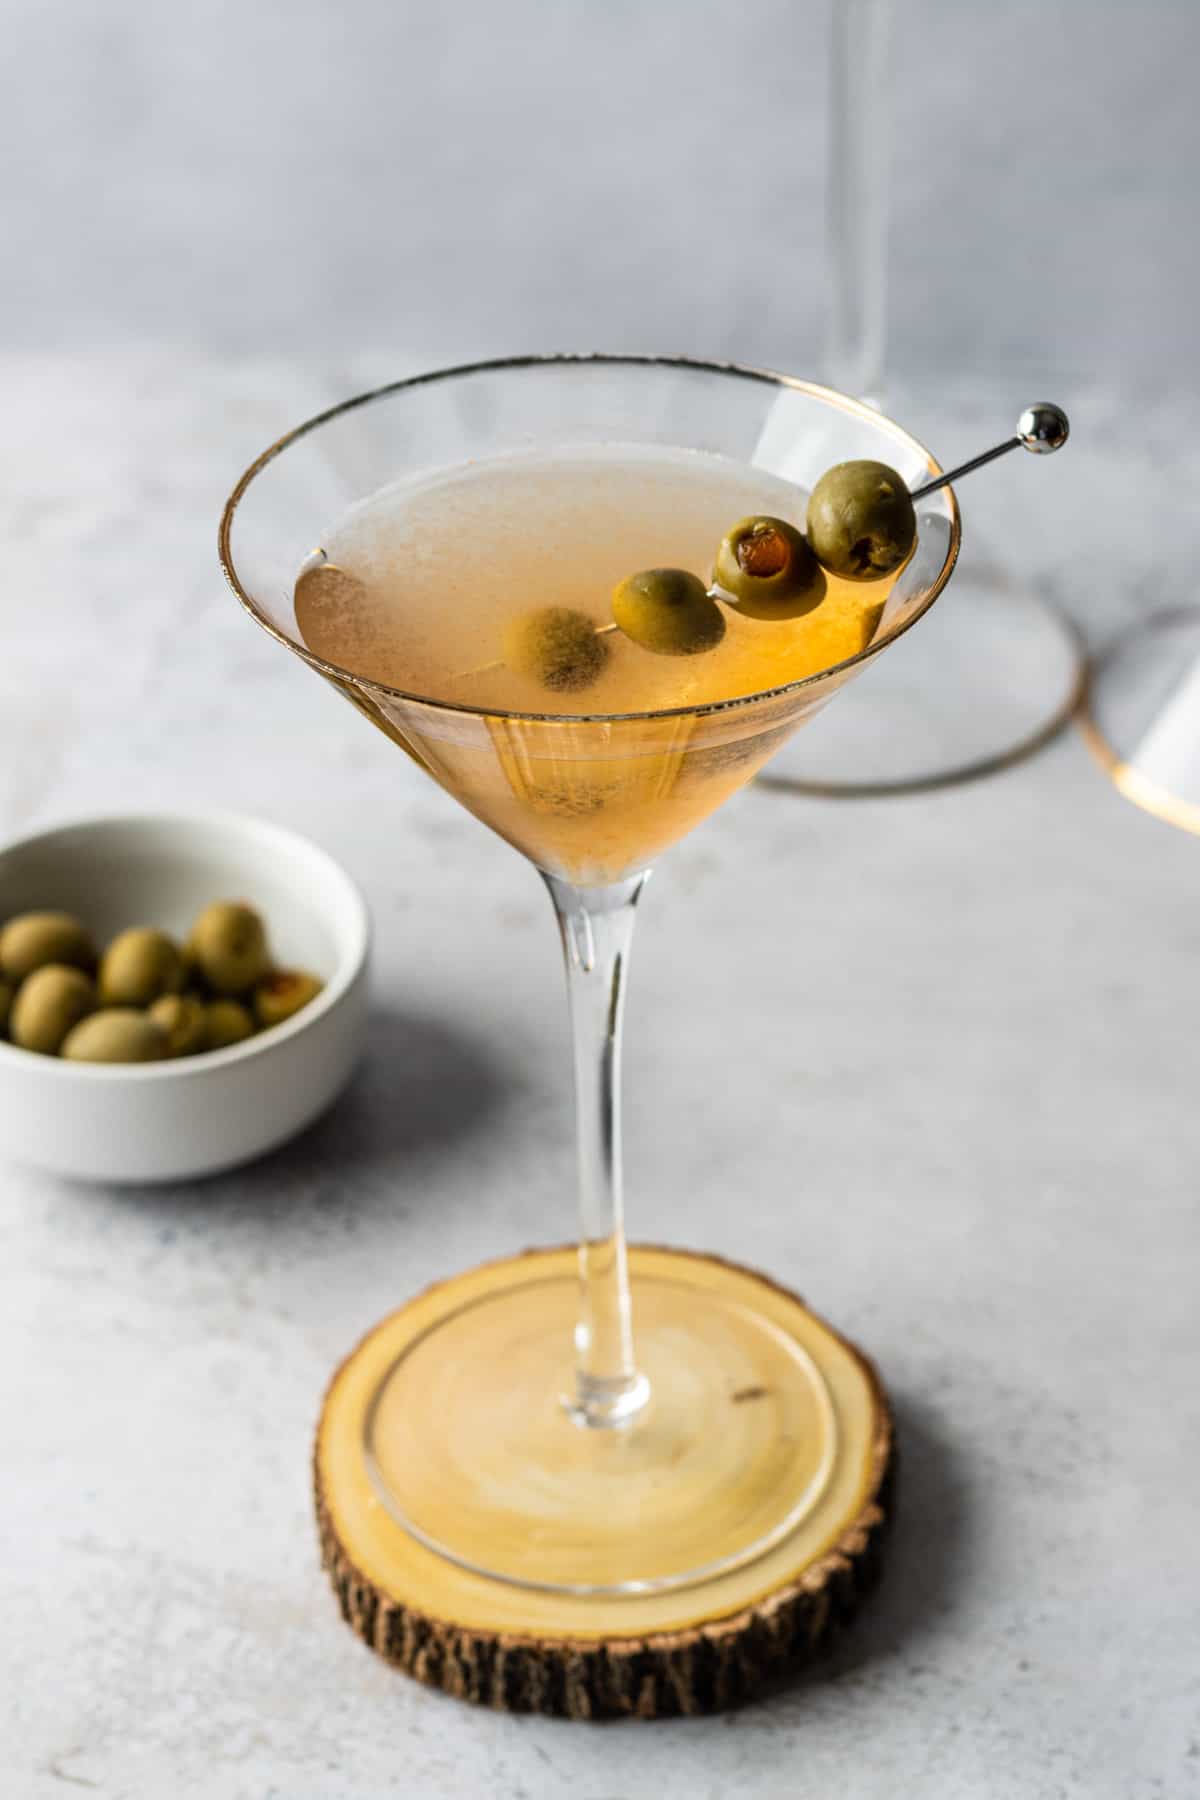 A spicy dirty martini garnished with four green olives on a wooden coaster with a small white bowl of extra green olives.